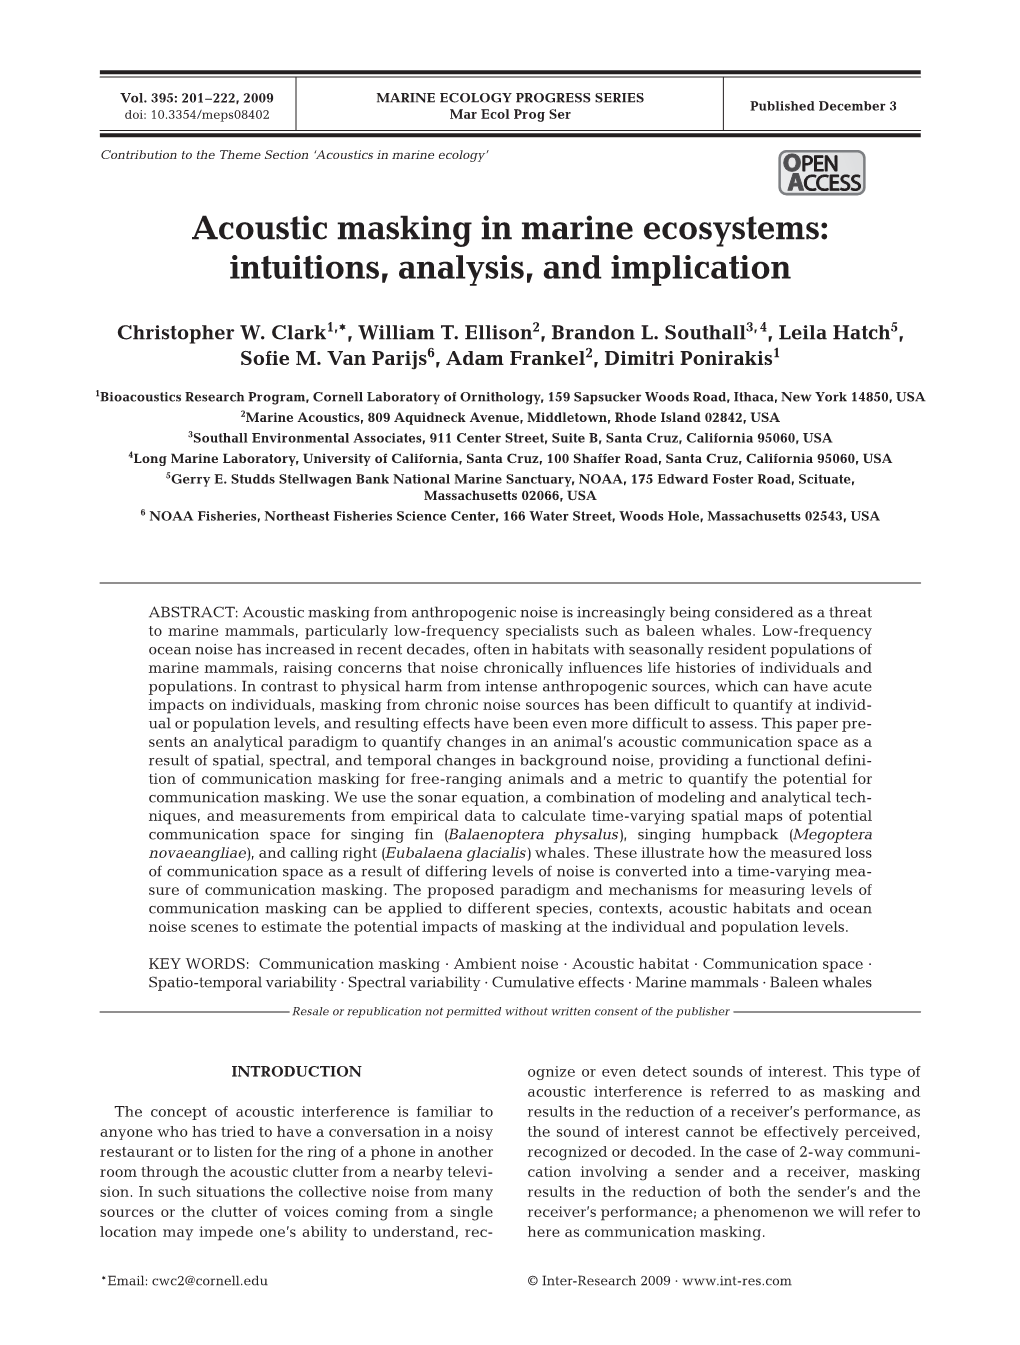 Acoustic Masking in Marine Ecosystems: Intuitions, Analysis, and Implication